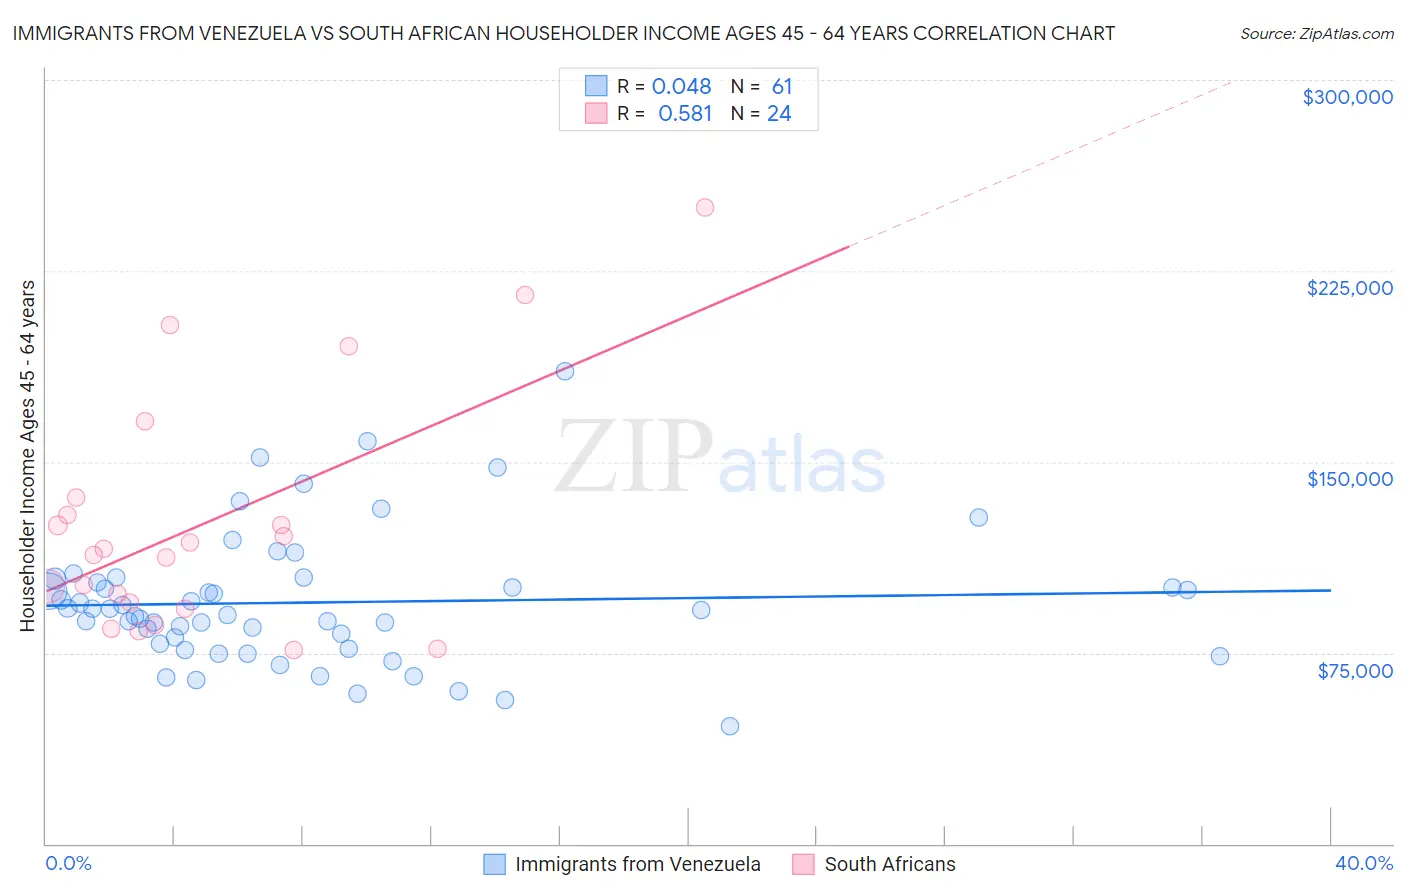 Immigrants from Venezuela vs South African Householder Income Ages 45 - 64 years